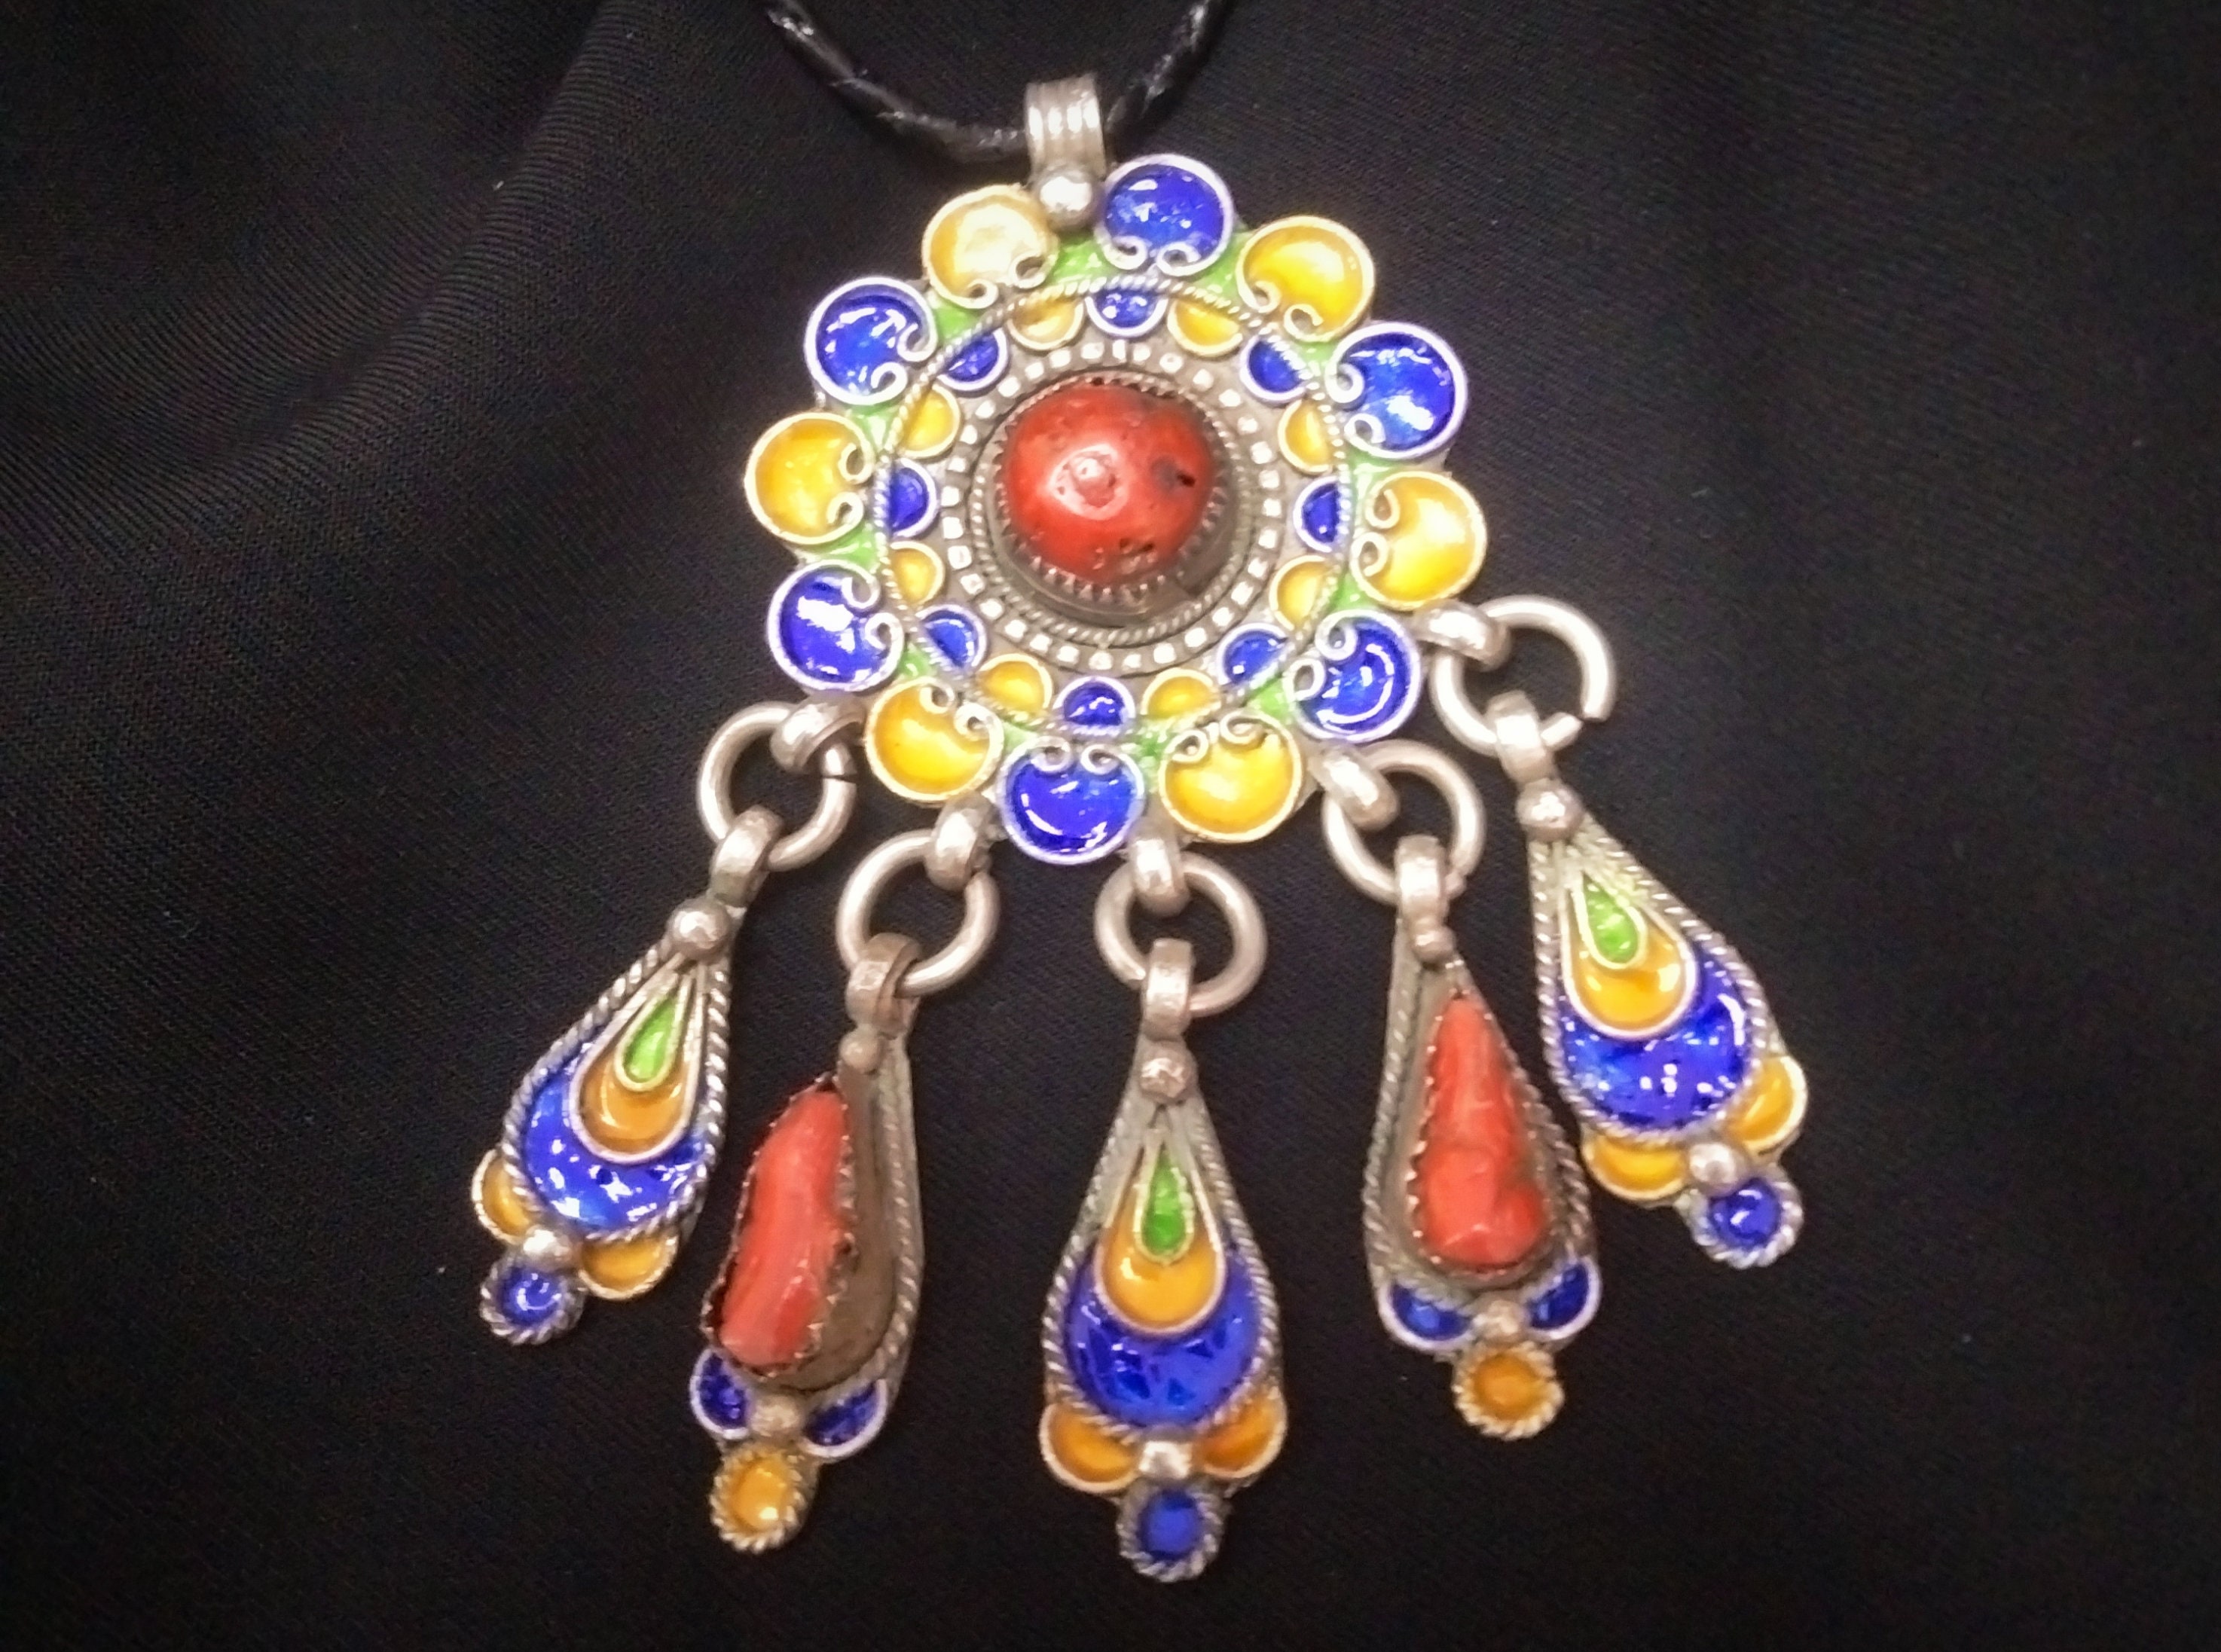 Algeria Vintage Algerian Pendant From the Greater Kabyle